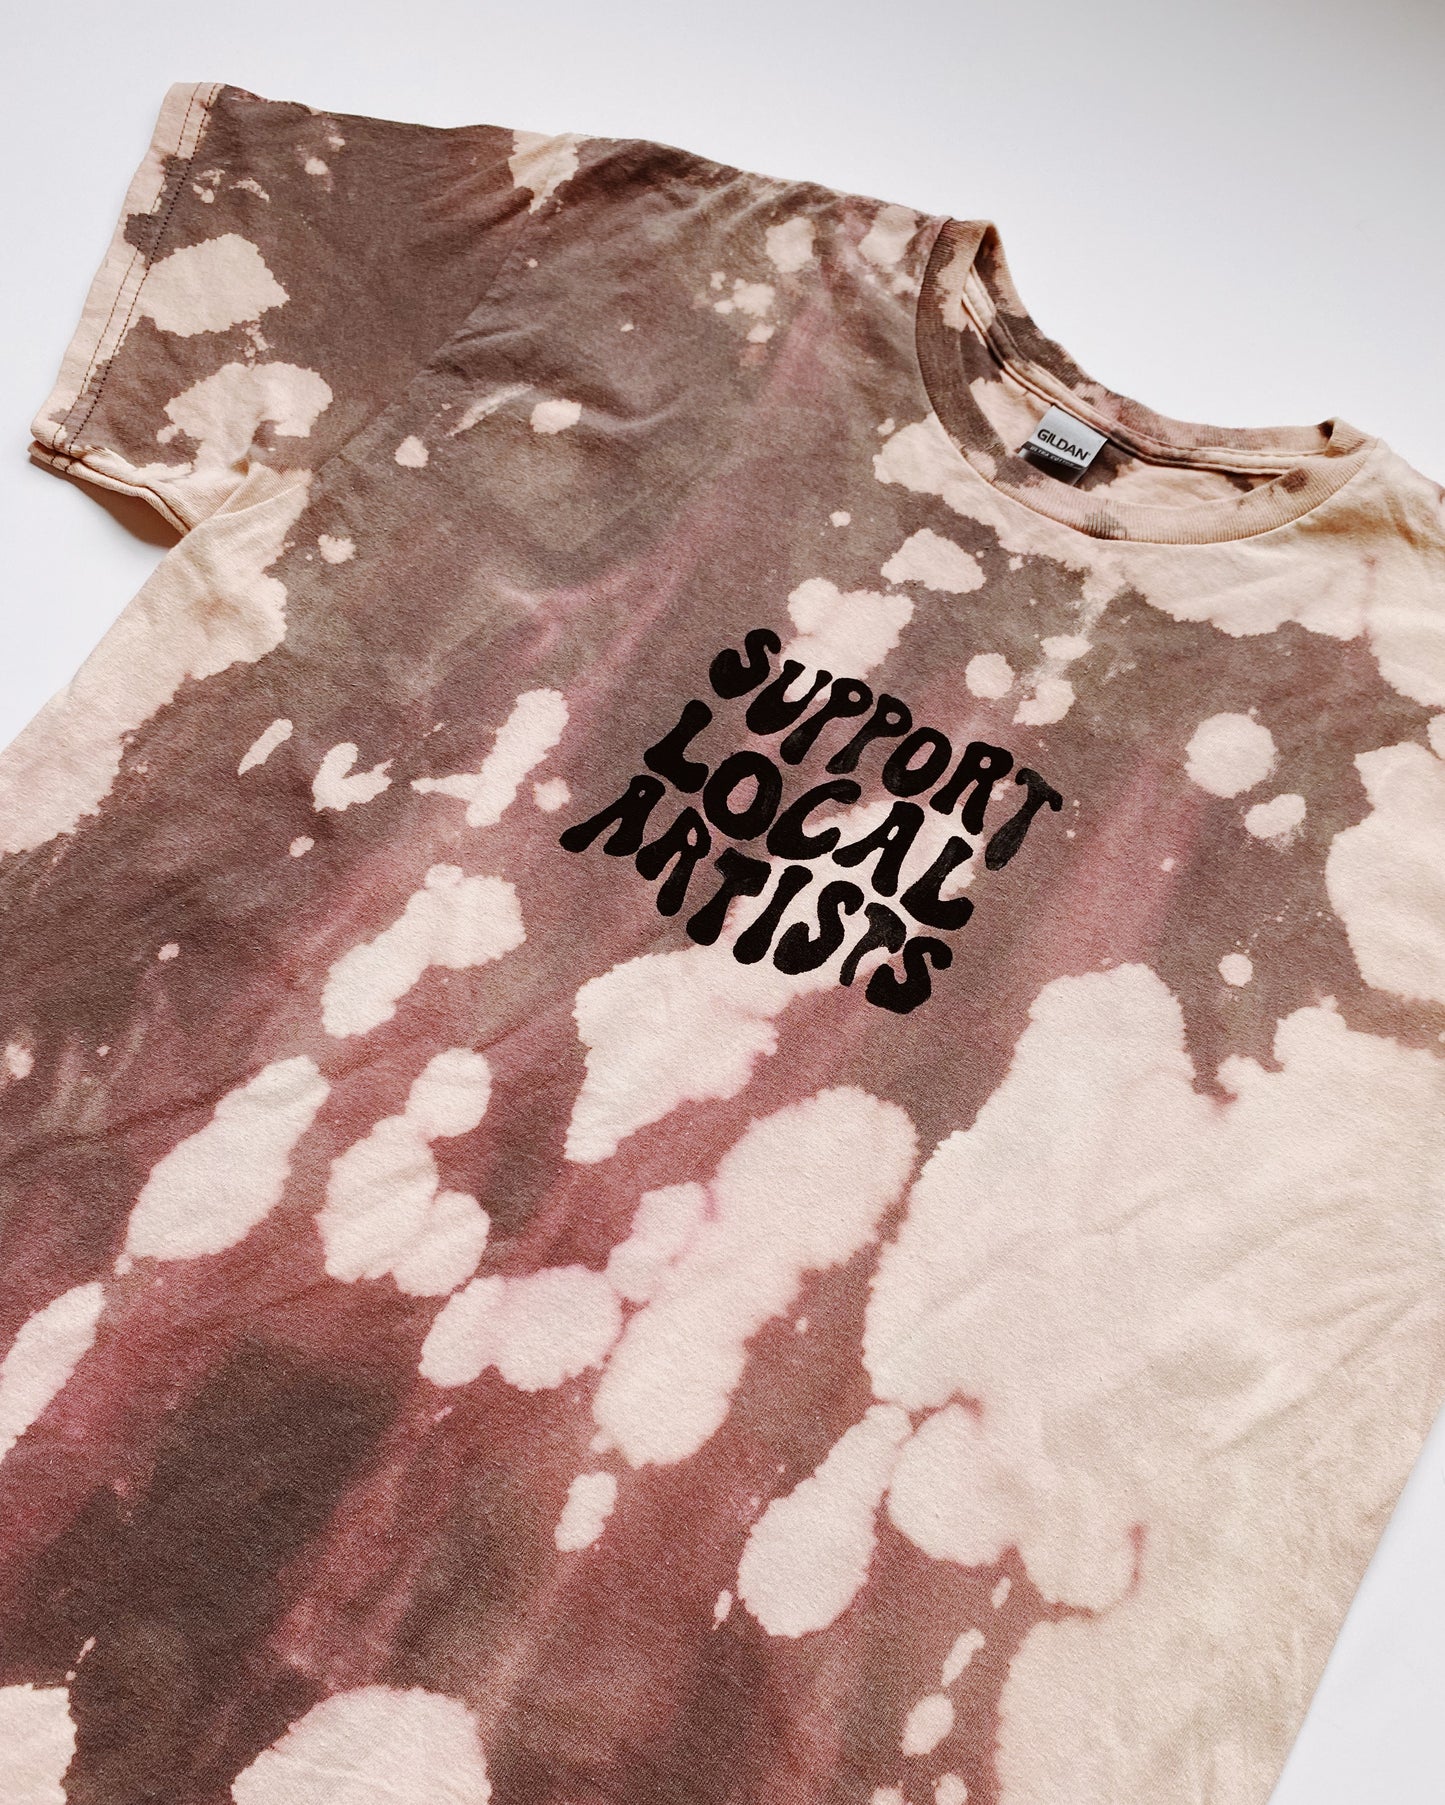 support local artists bleached tee